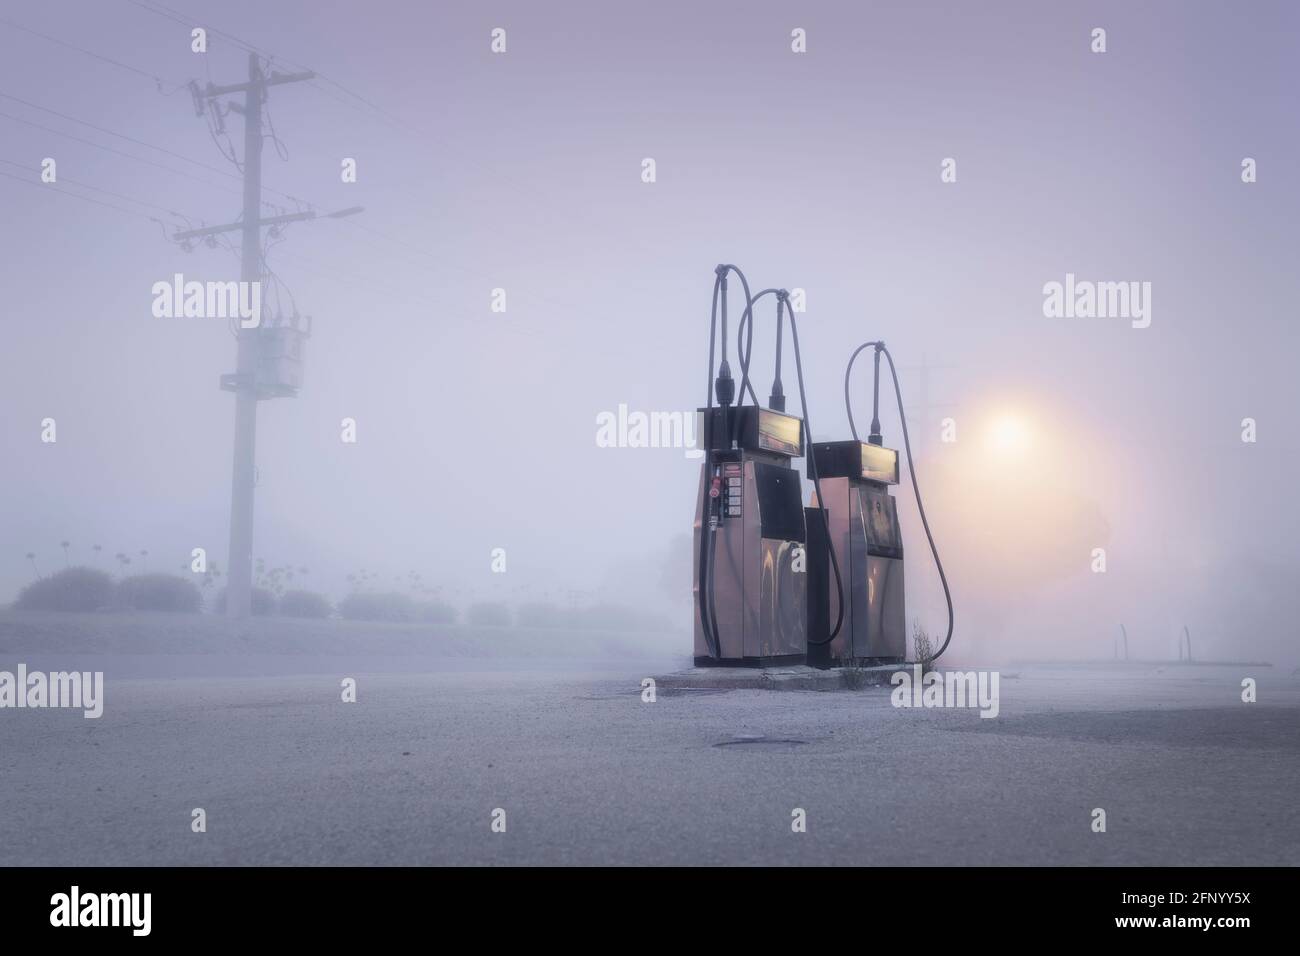 Old fashioned gas pumps on a foggy street at dawn, Australia Stock Photo